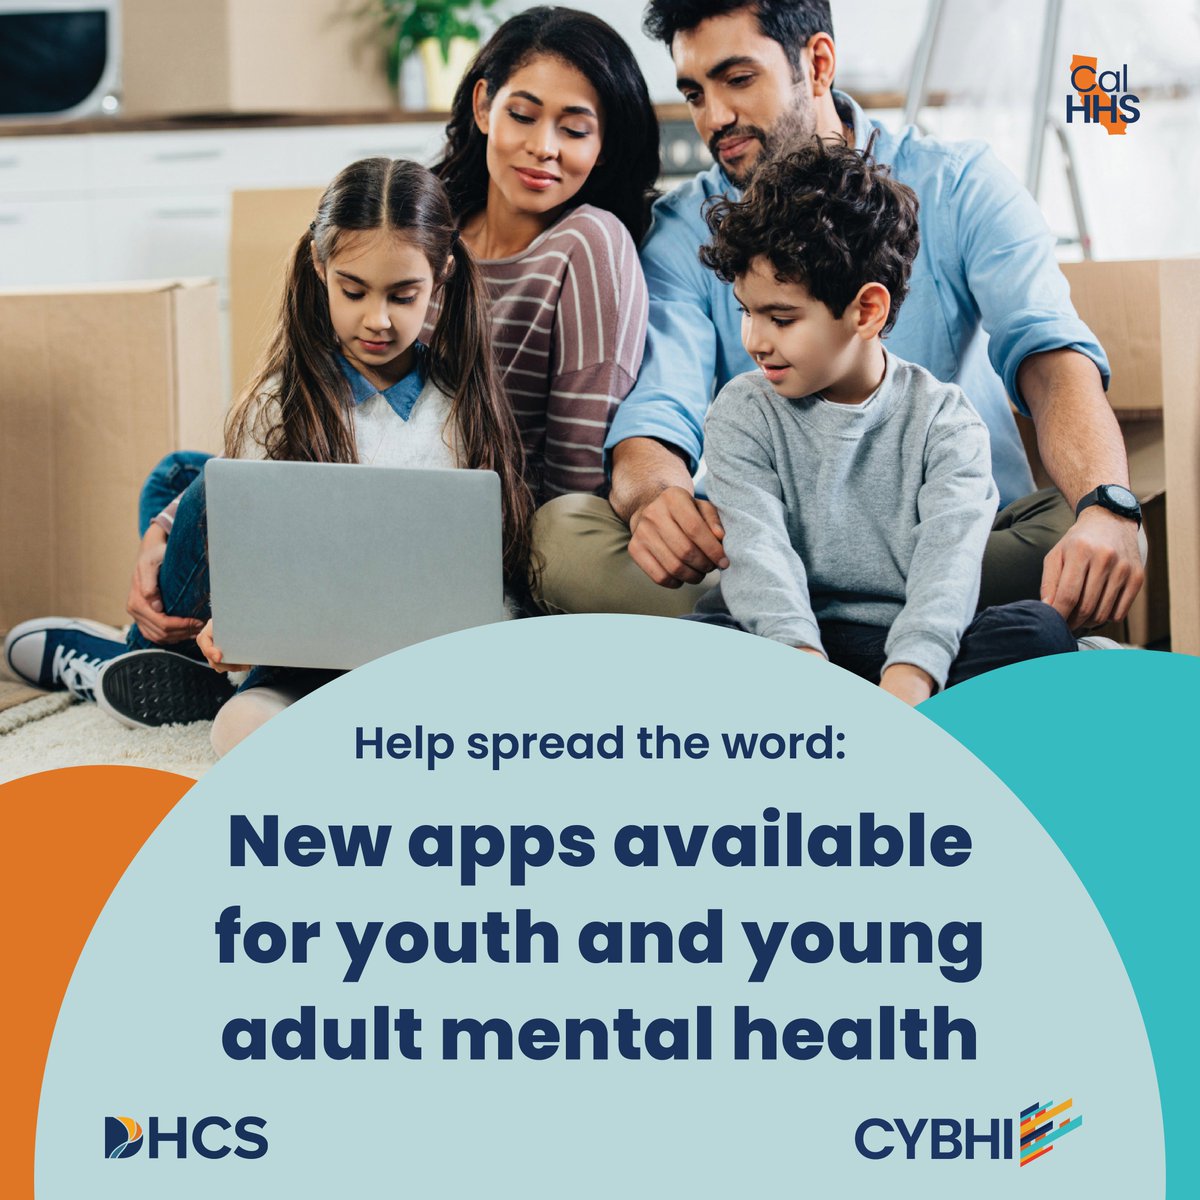 CA's new BrightLife Kids & Soluna apps are designed to support the mental health of our youth & young adults. The apps provide free, safe + confidential mental health support. 📲 calhope.org